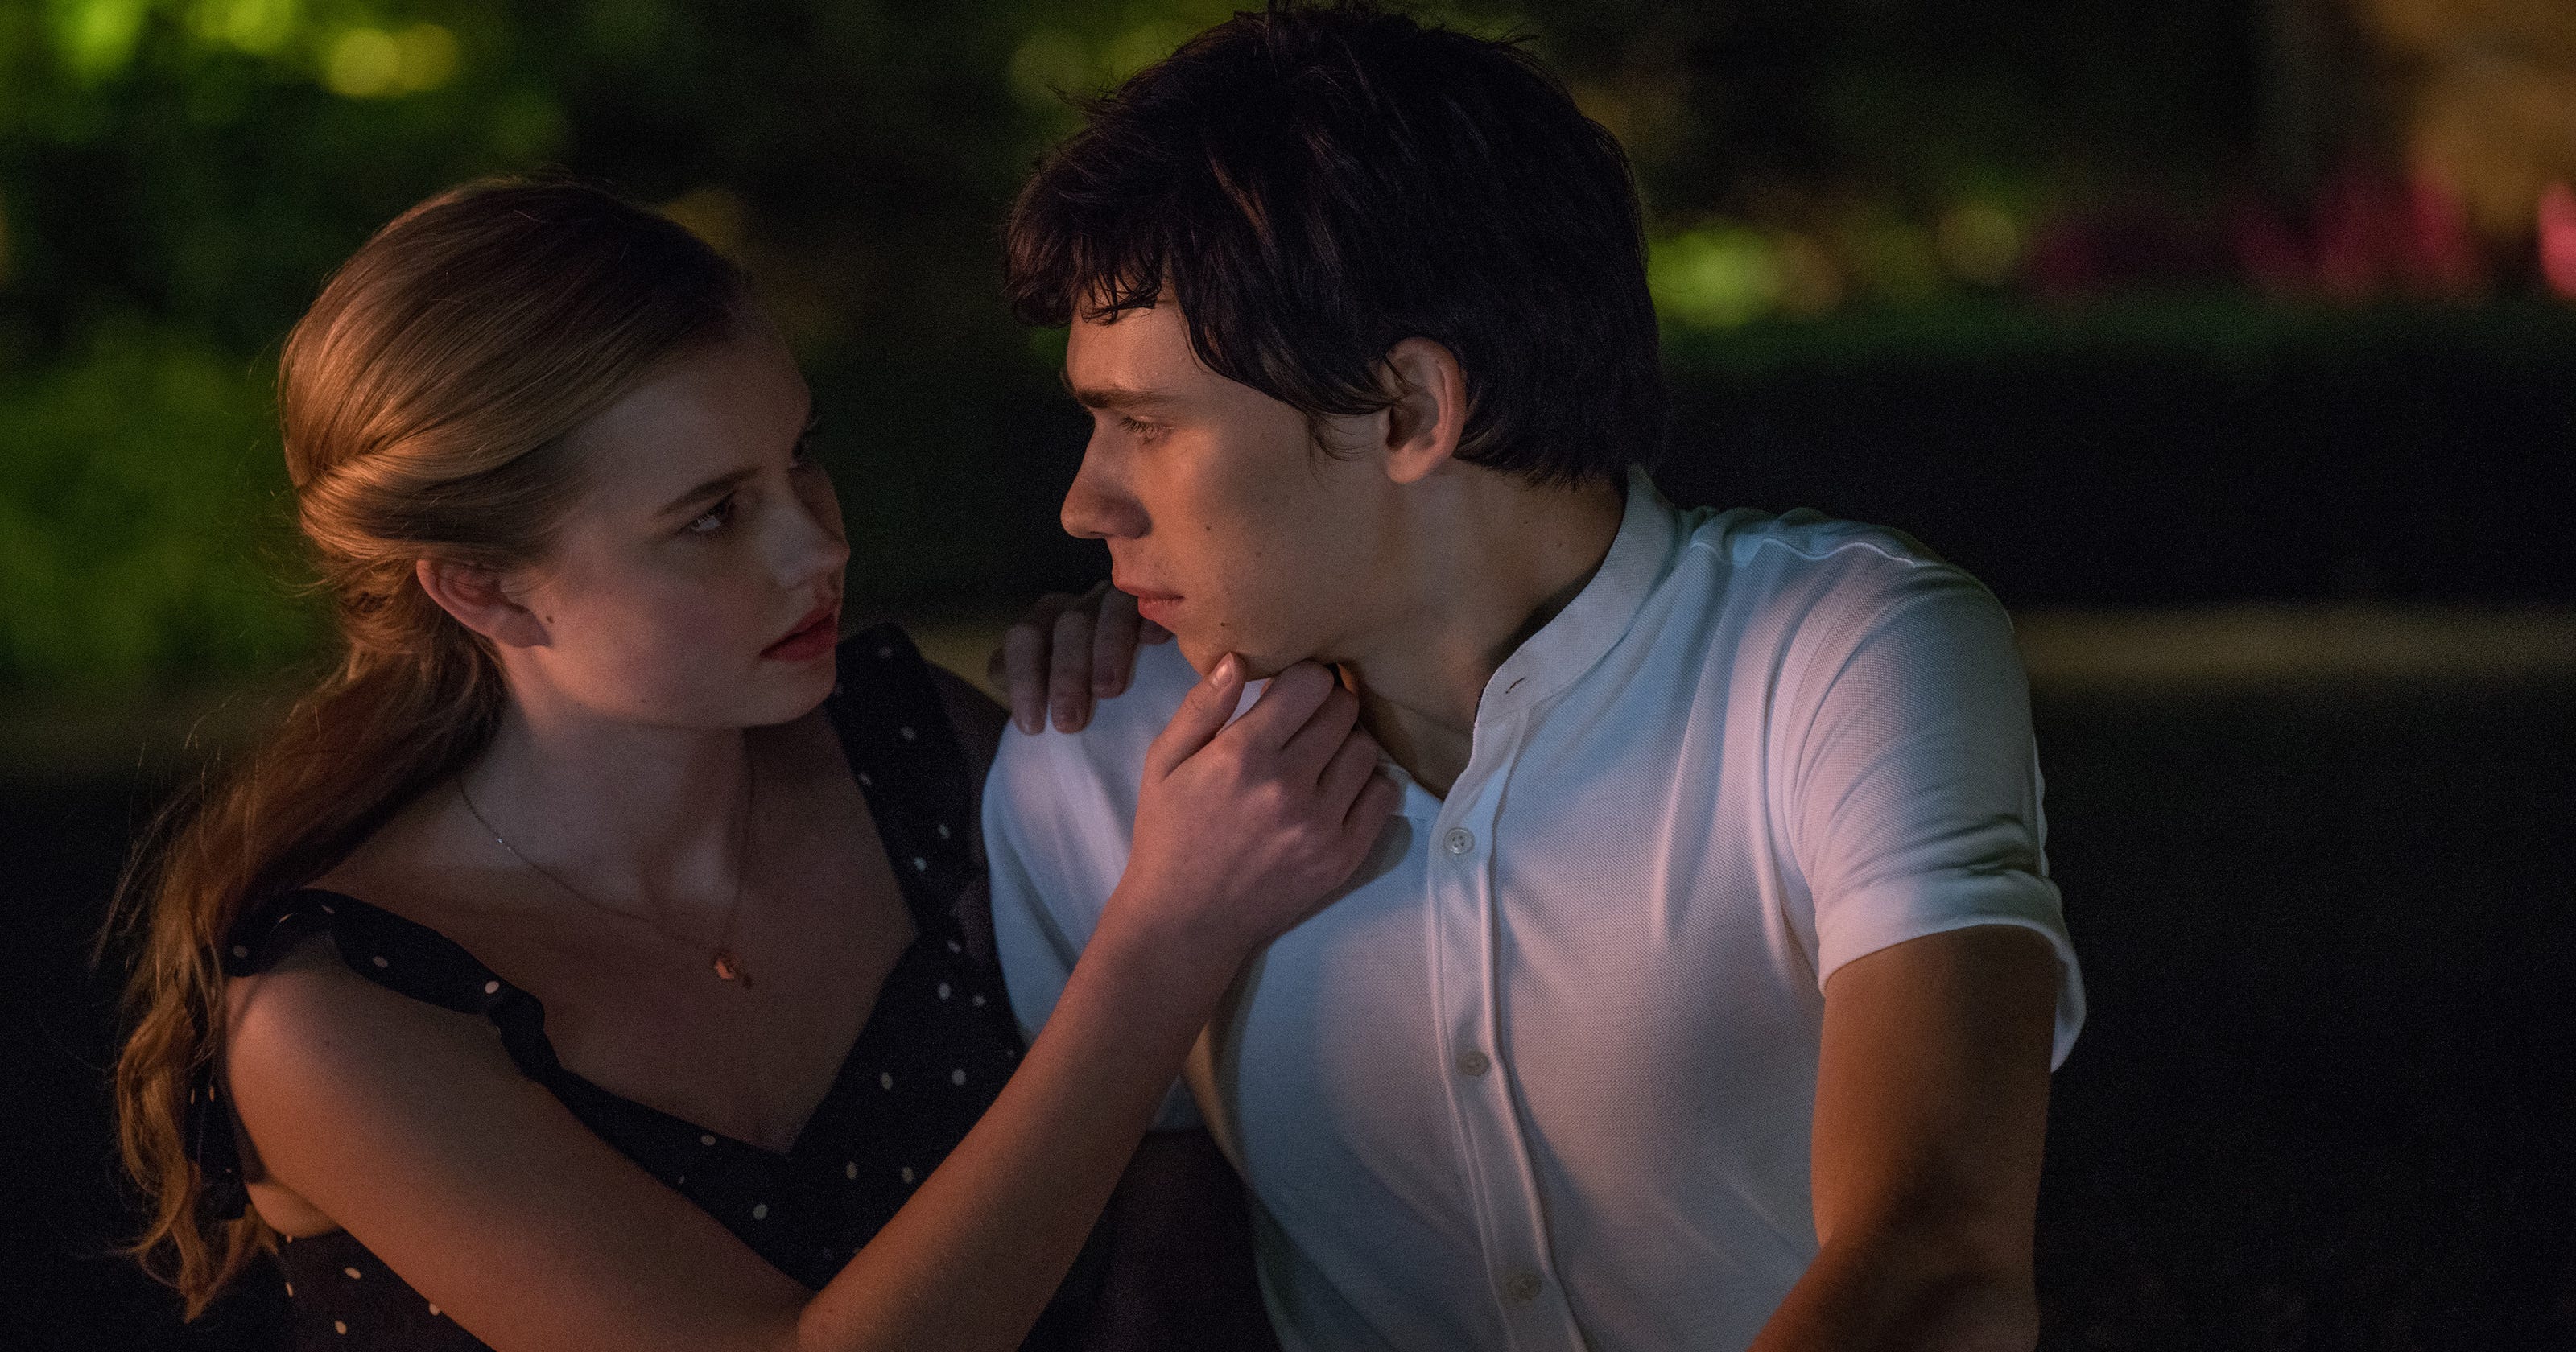 Every Day Why The Teen Film Is Your New Ya Obsession